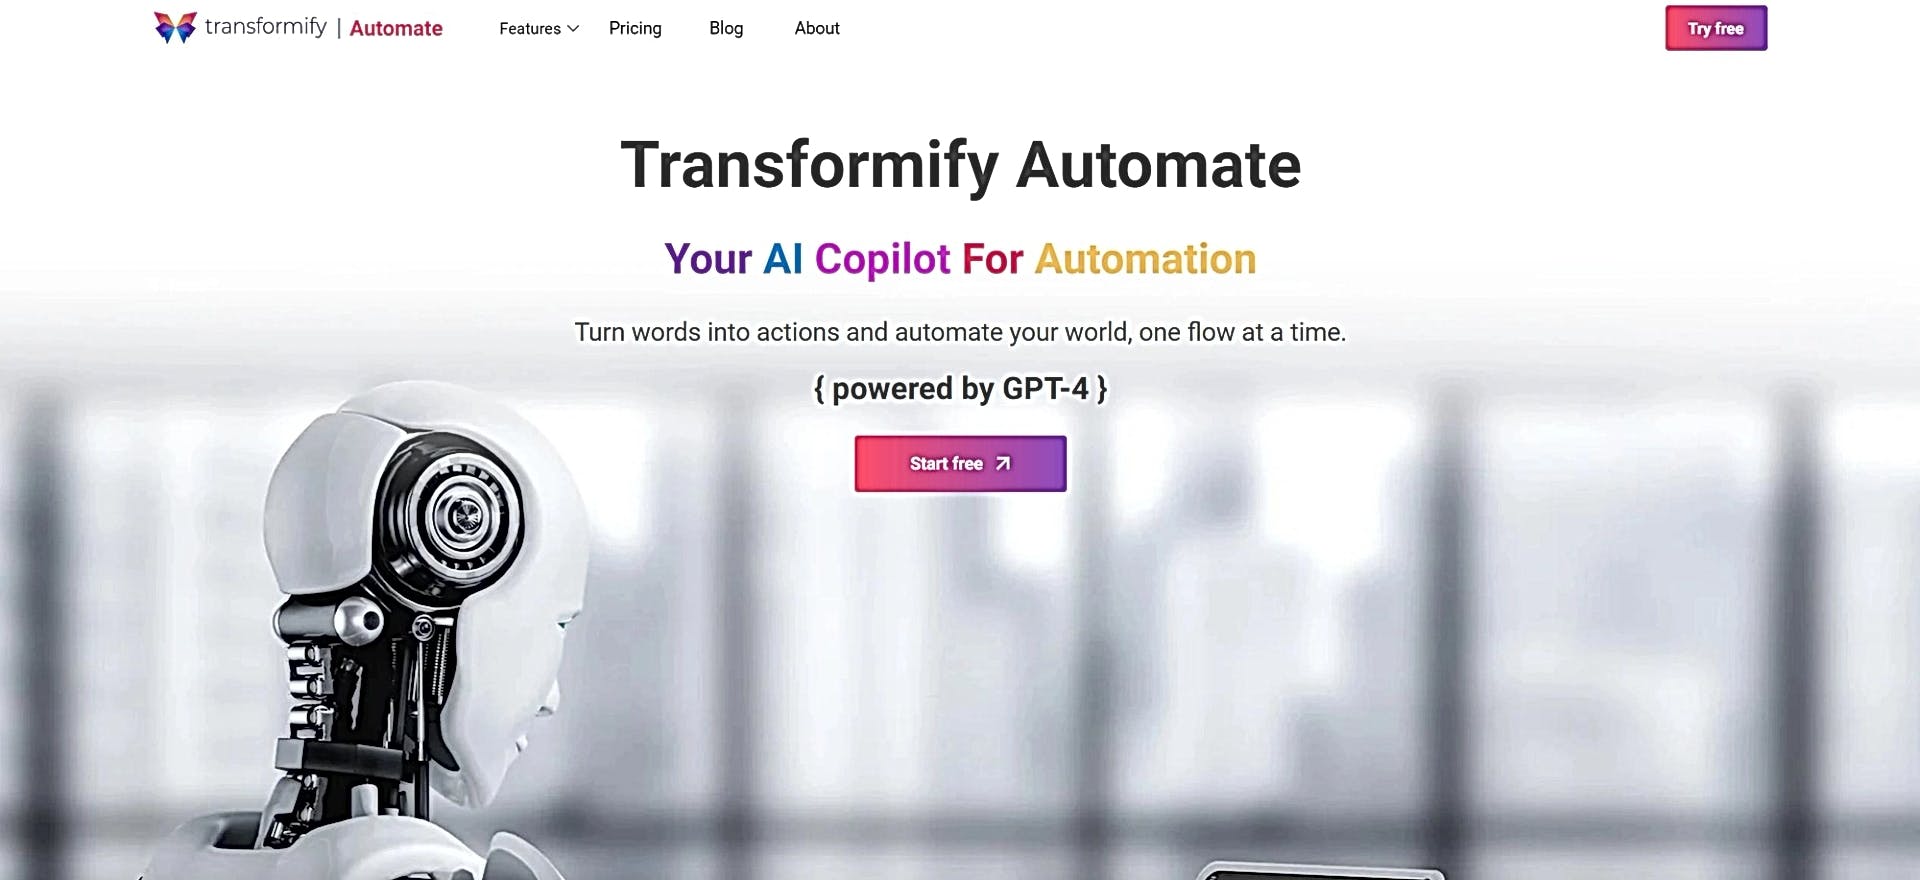 Transformify Automate featured